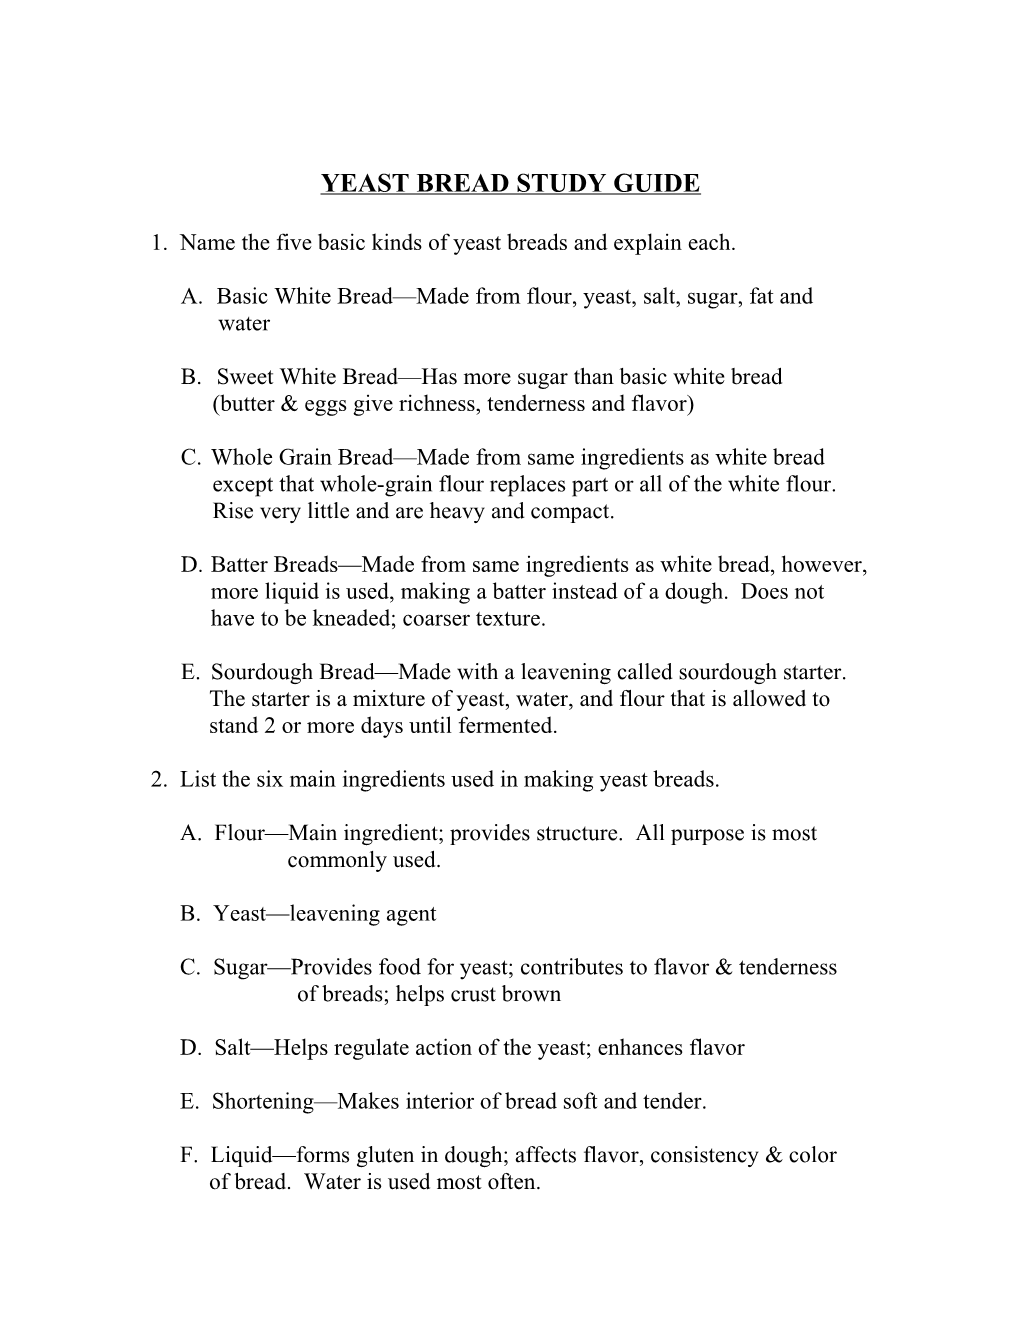 Yeast Bread Study Guide